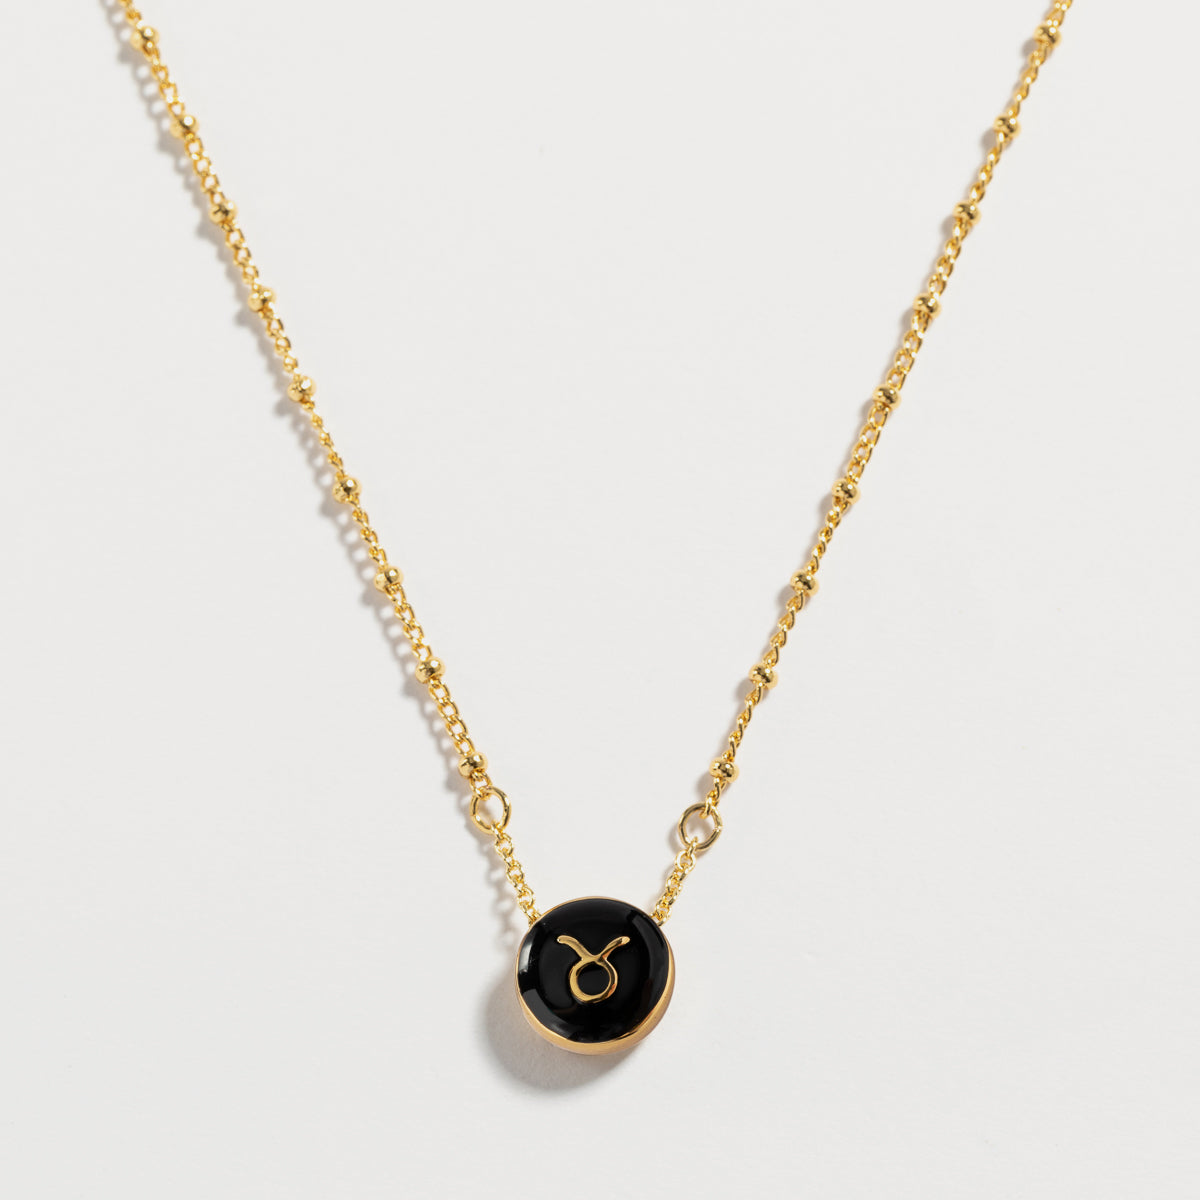 Astrological Sign Taurus Necklace